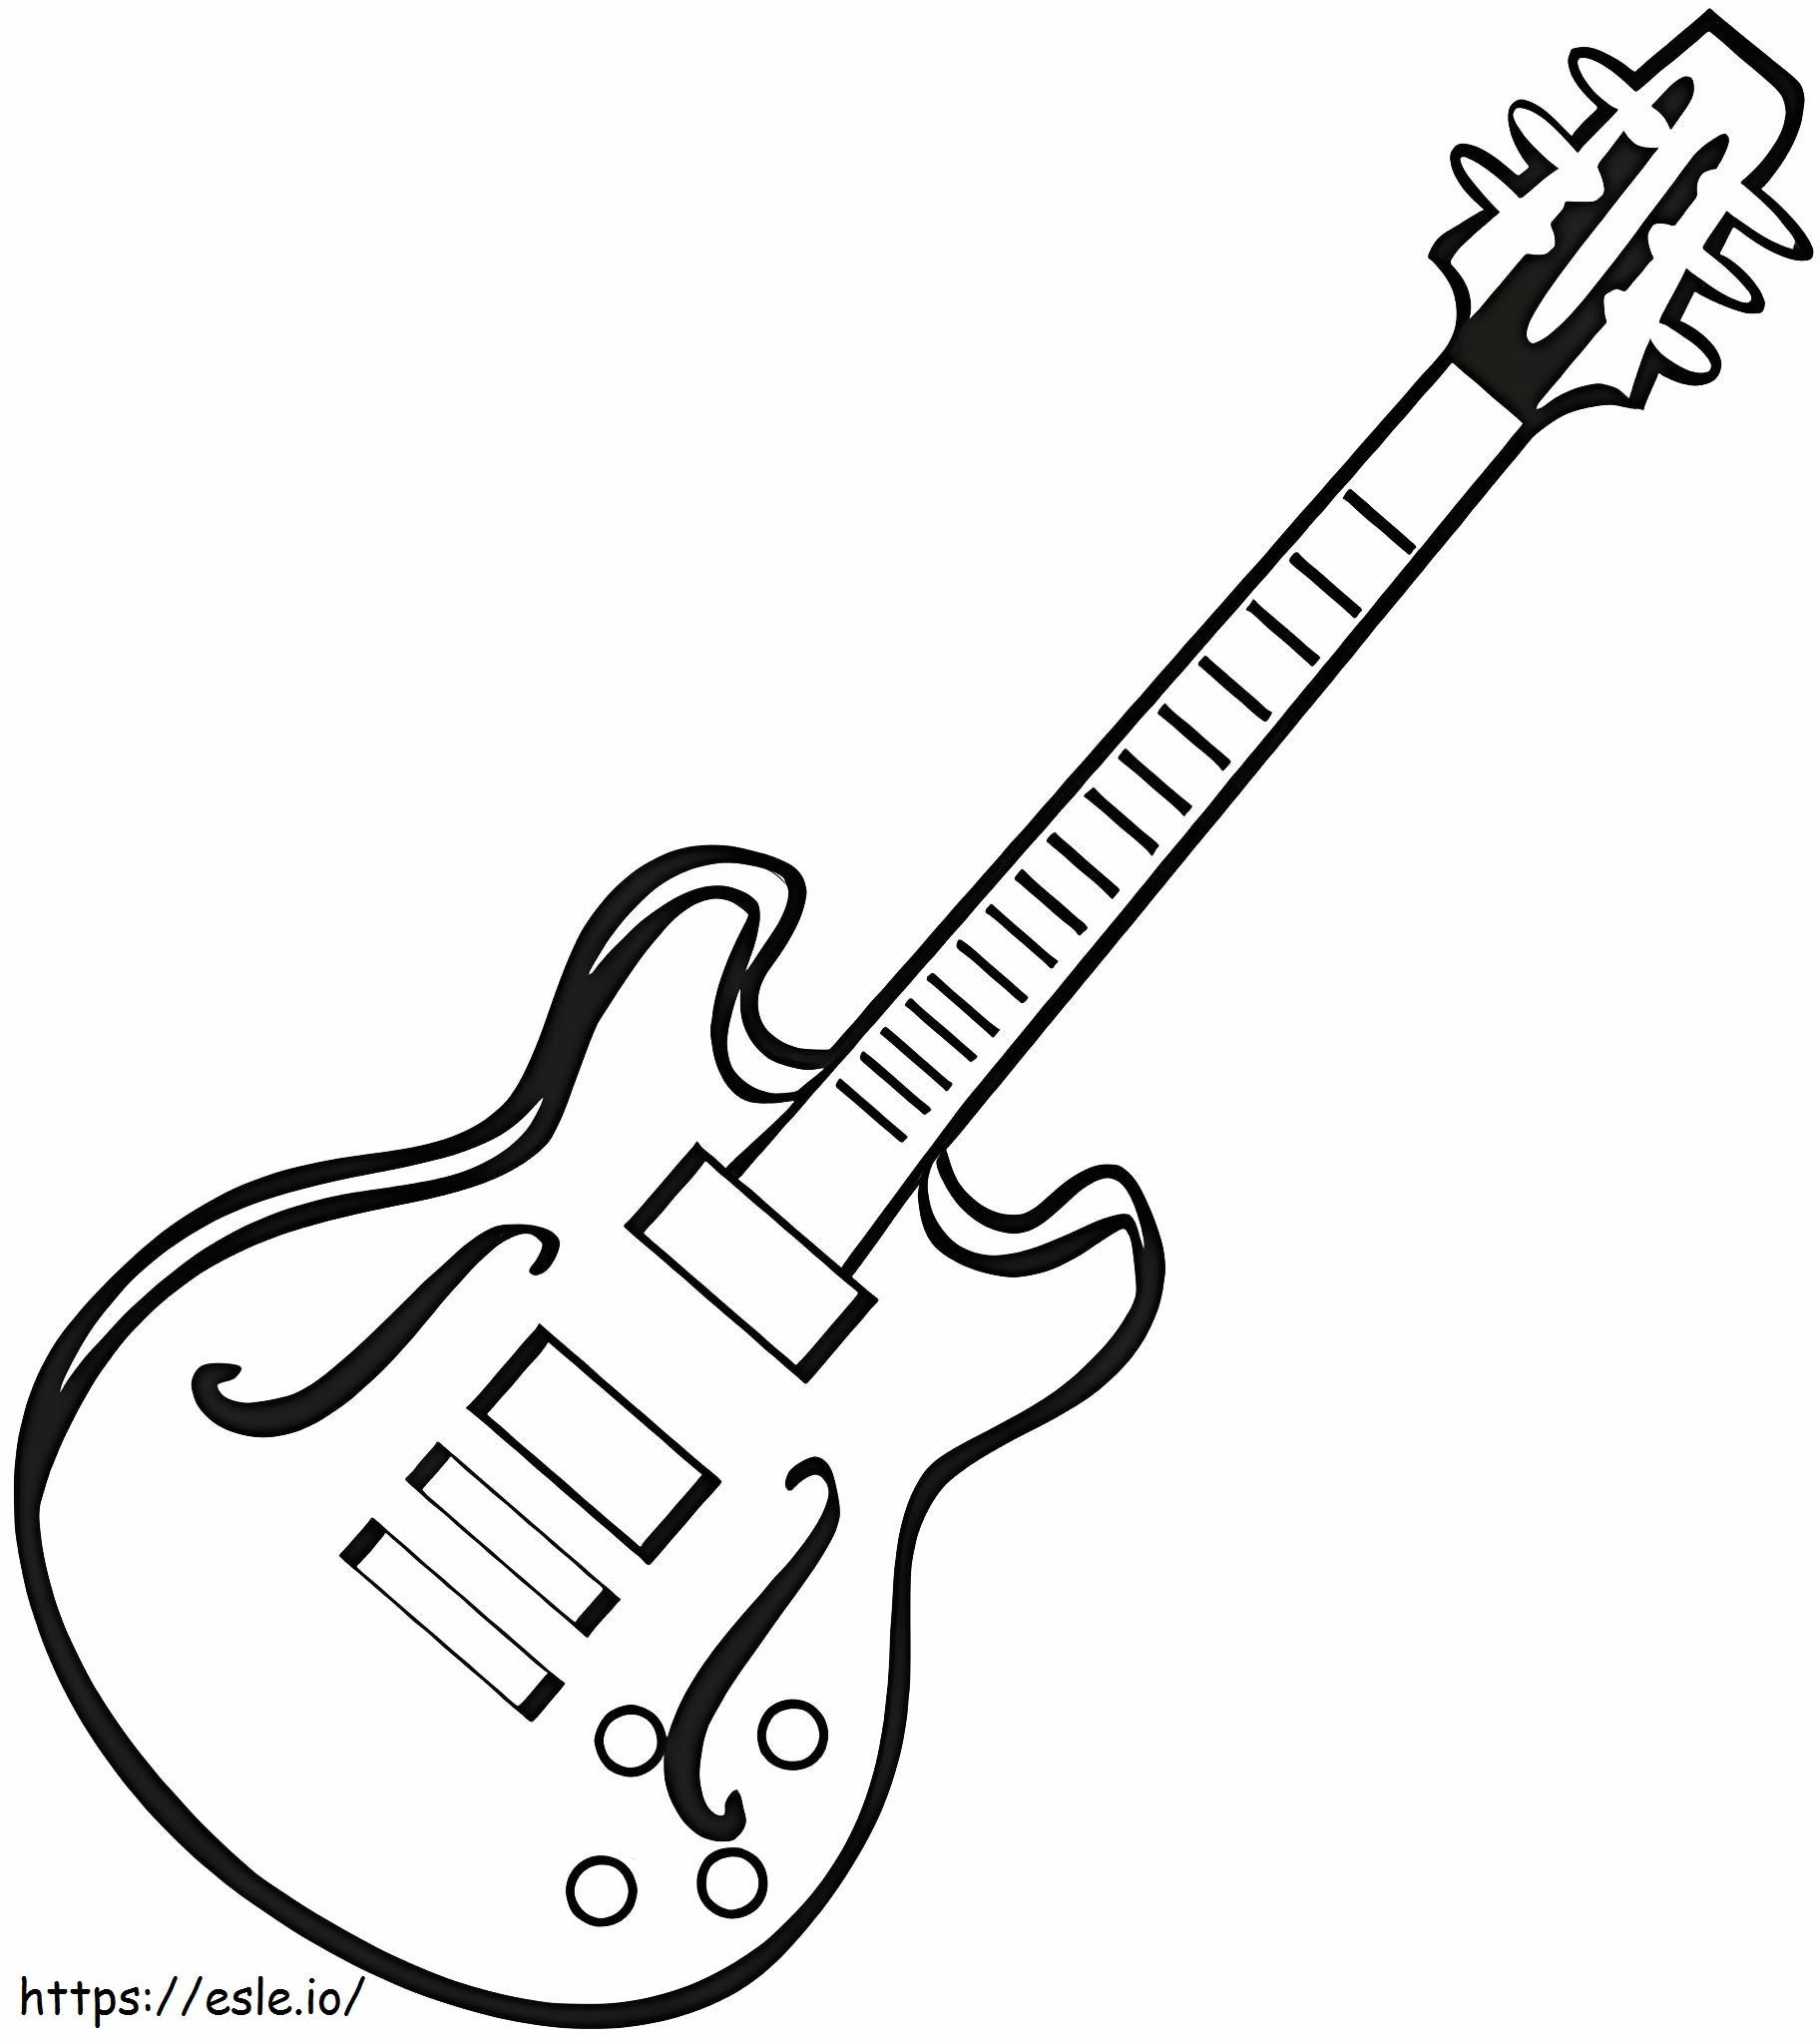 Free Electric Guitar coloring page